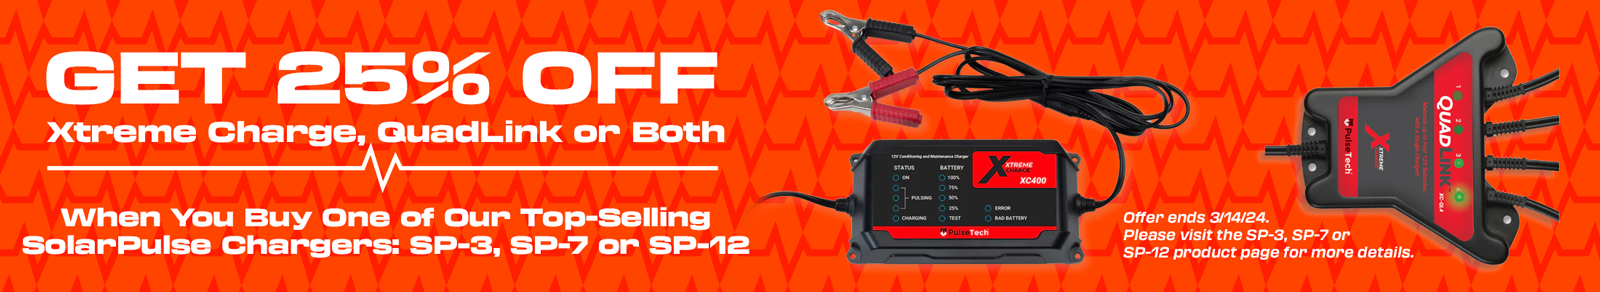 Purchase an SP-3 (735X453), SP-7 (735X467), or SP-12 (735X468) before 3/14/24 and we will email you a 25% off promo code to use towards purchasing an XC400 Xtreme Charge 4-Amp Battery Maintainer Charger (200x010), QuadLink 4-Channel Battery Charger Multiplier (100×004) or QuadLink and XC400 Kit (200x005) by 3/14/24. See SP-3, SP-7 or SP-12 product page for details